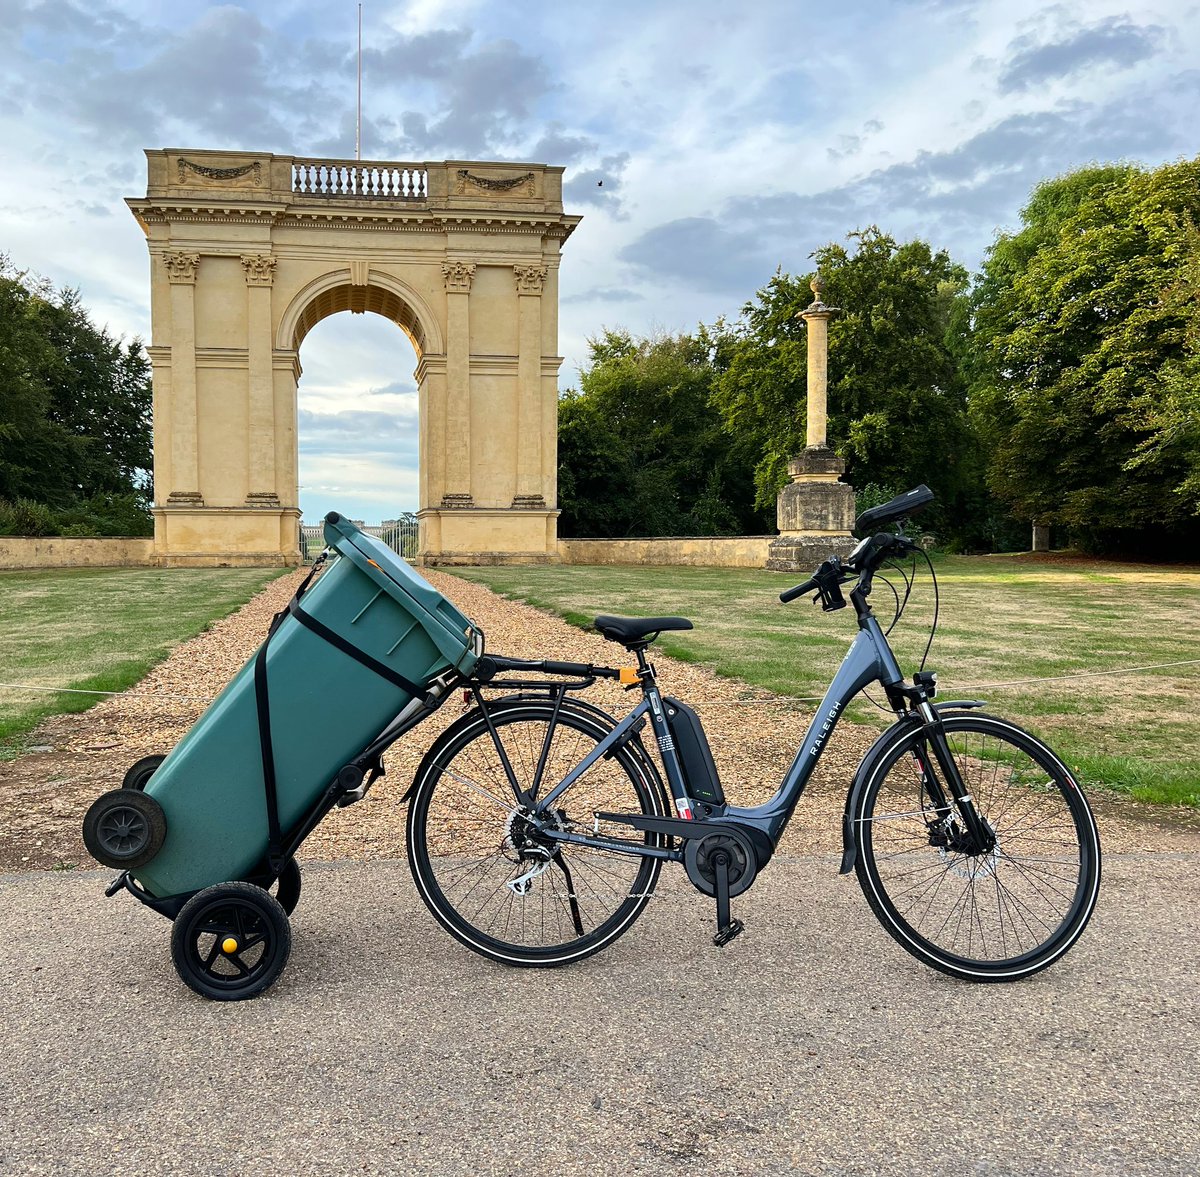 When you live on a historic estate and it’s a one mile round trip to put your wheelie bin out 🚲🤩 #recycling #lifehacks #upcycle #buckinghamshirecouncil #stowe #buckingham #raleighbikes #burley #cargo #design #recycling #travoy #breakingalltherules